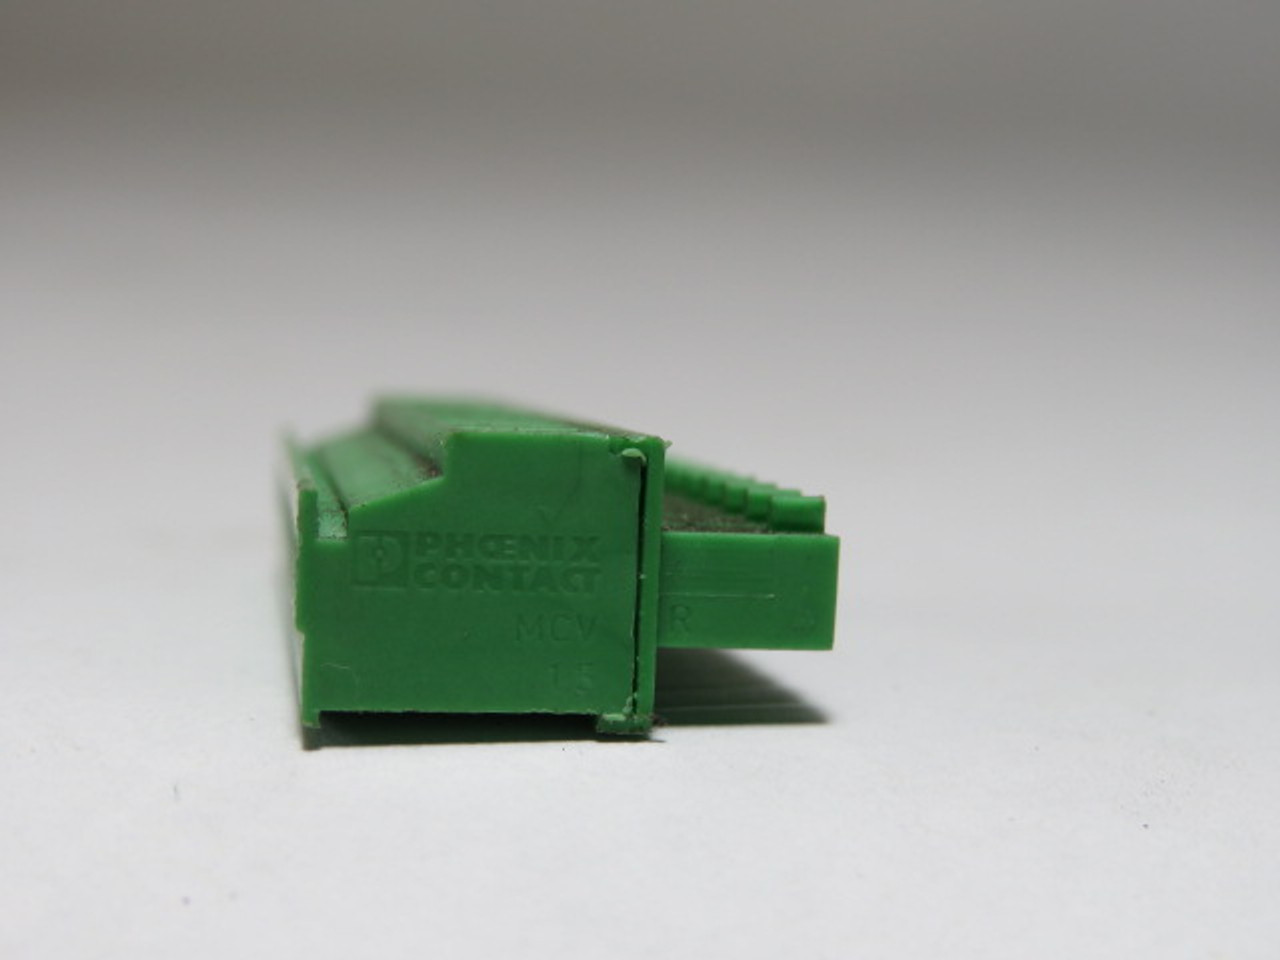 Phoenix Contact MCV1.5/13-G-3.81 PCB Connector 13-Pos GREEN USED